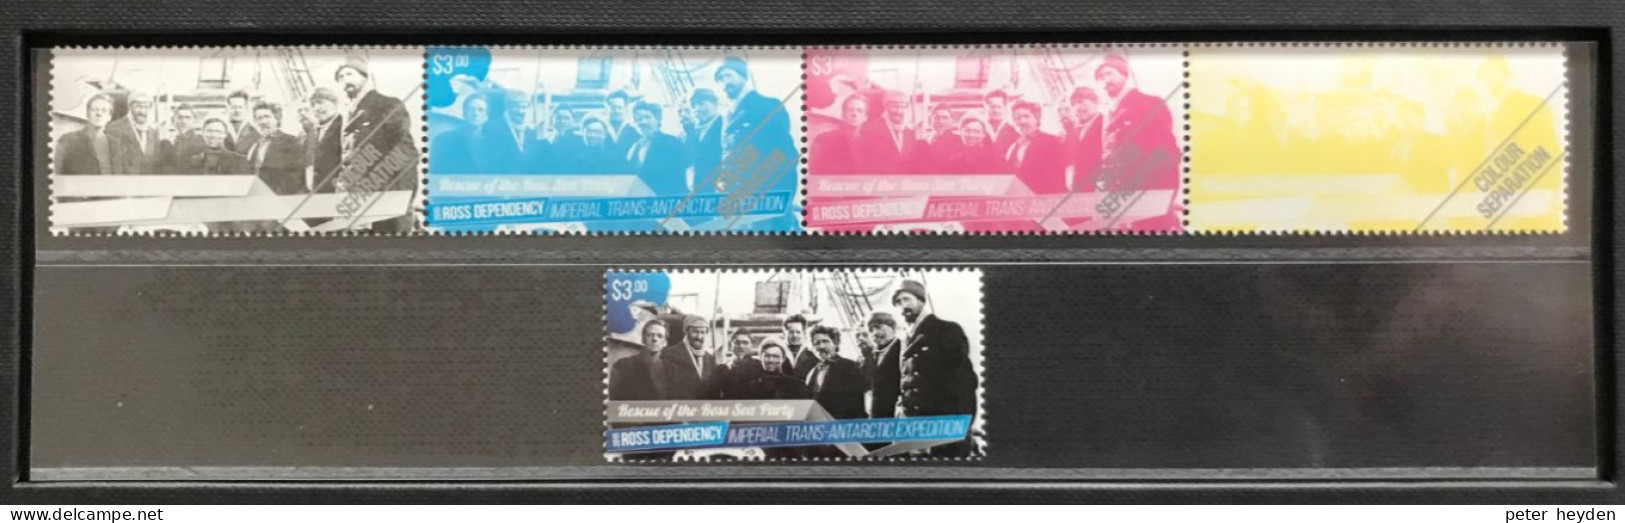 ROSS 2015 ~ DeLuxe Set With MNH ** Special Block, Se-tenant Block Of 6, Color Seperation Strip, FDC Etc. - Nuovi